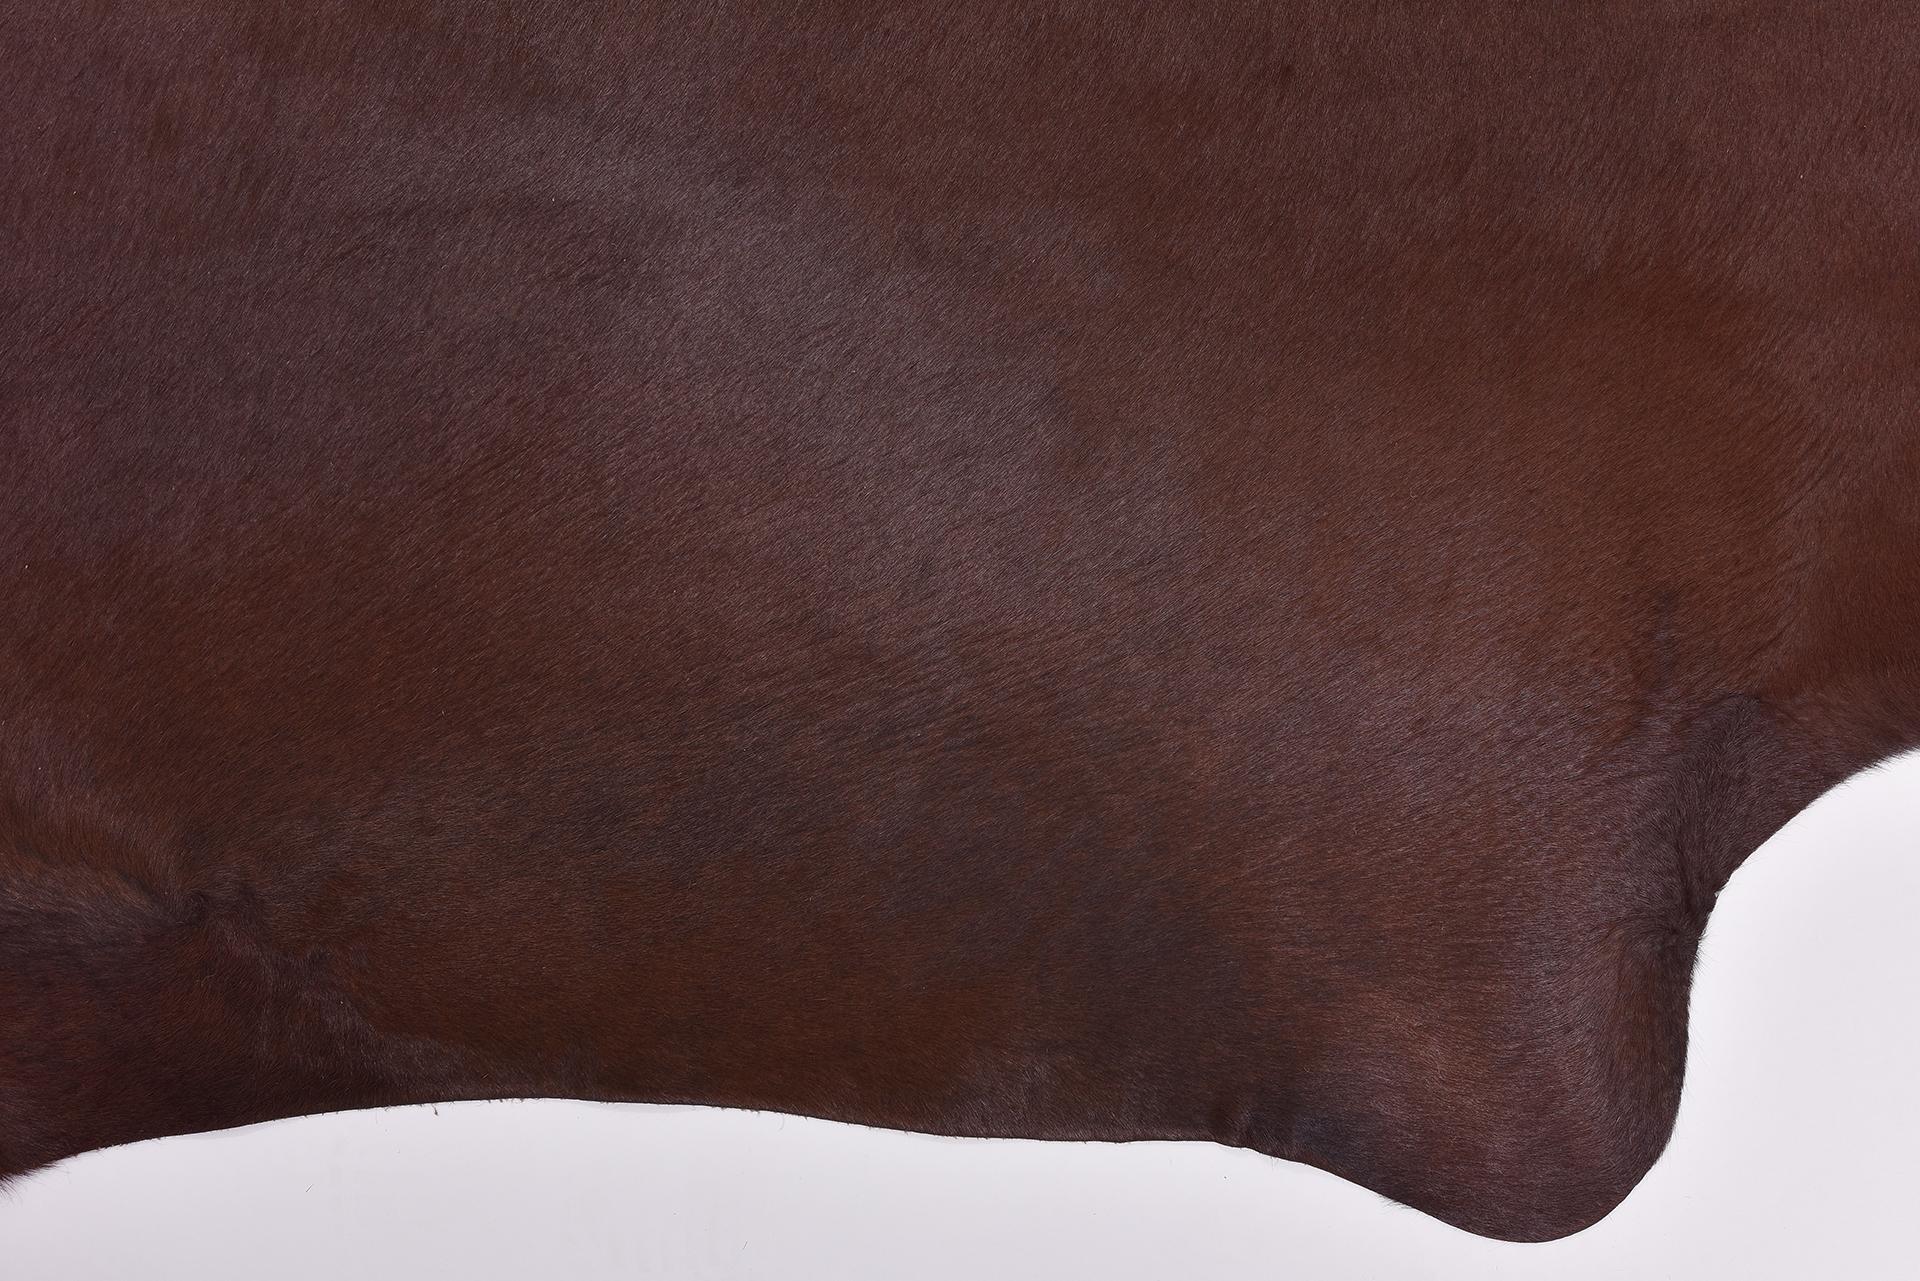 Contemporary Leather in Natural Brown Color For Sale